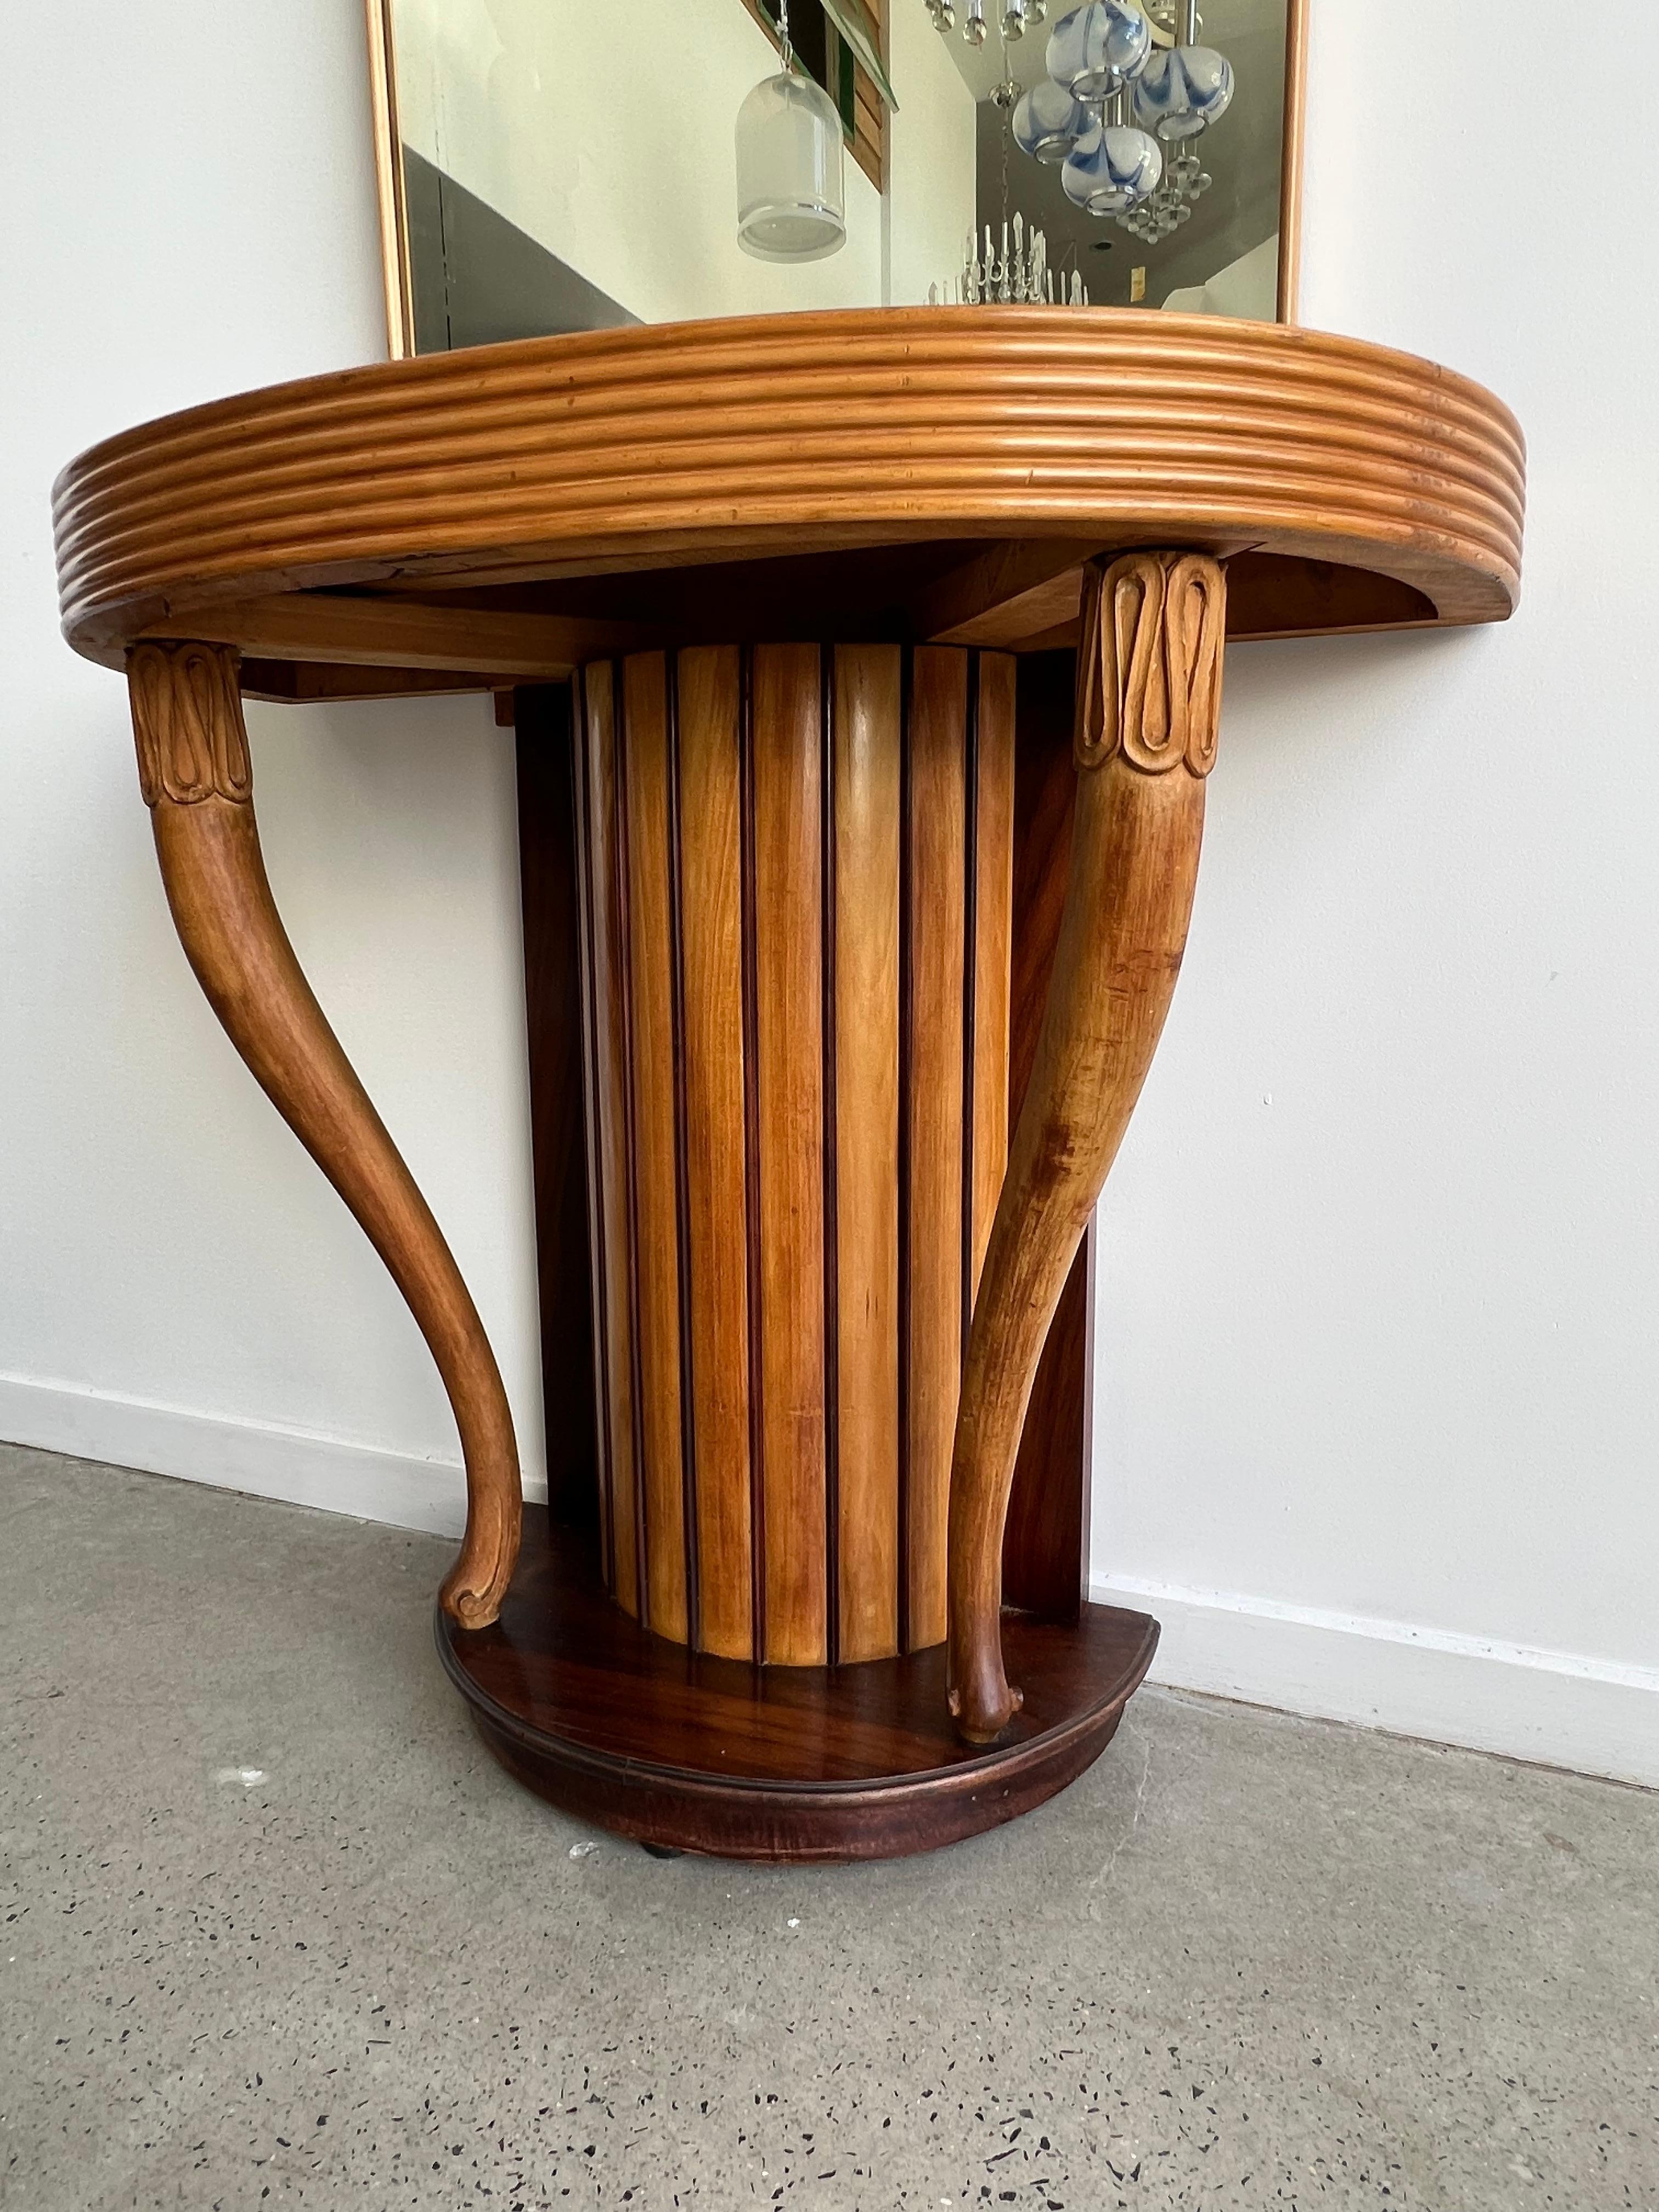 Italian Mirror Timber Console by Osvaldo Borsani 1950 In Good Condition For Sale In Byron Bay, NSW